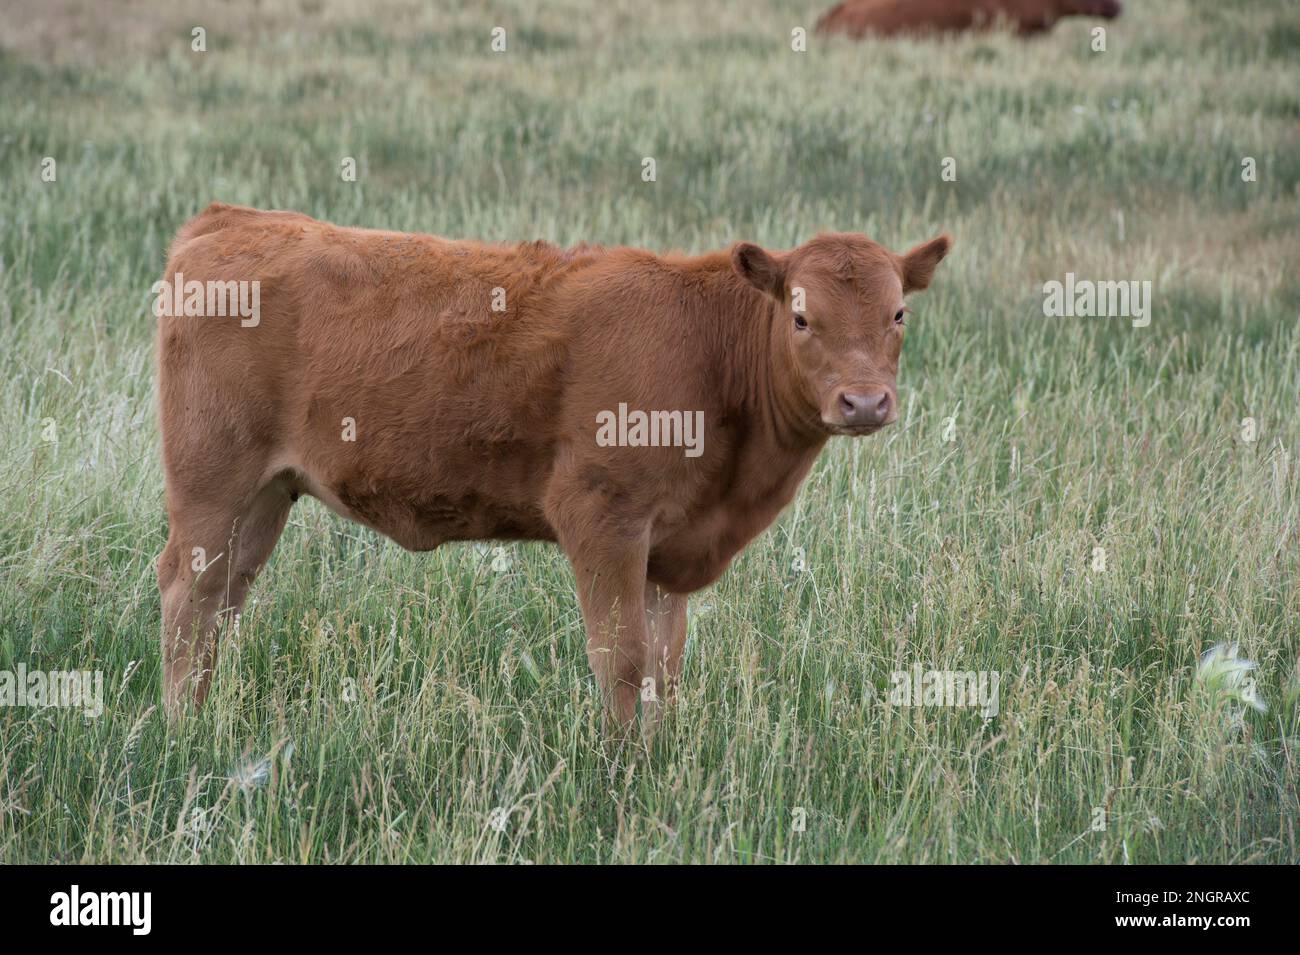 Red Angus yearling standing in a grassy meadow on the Upper Lost River Range, Idaho. Stock Photo